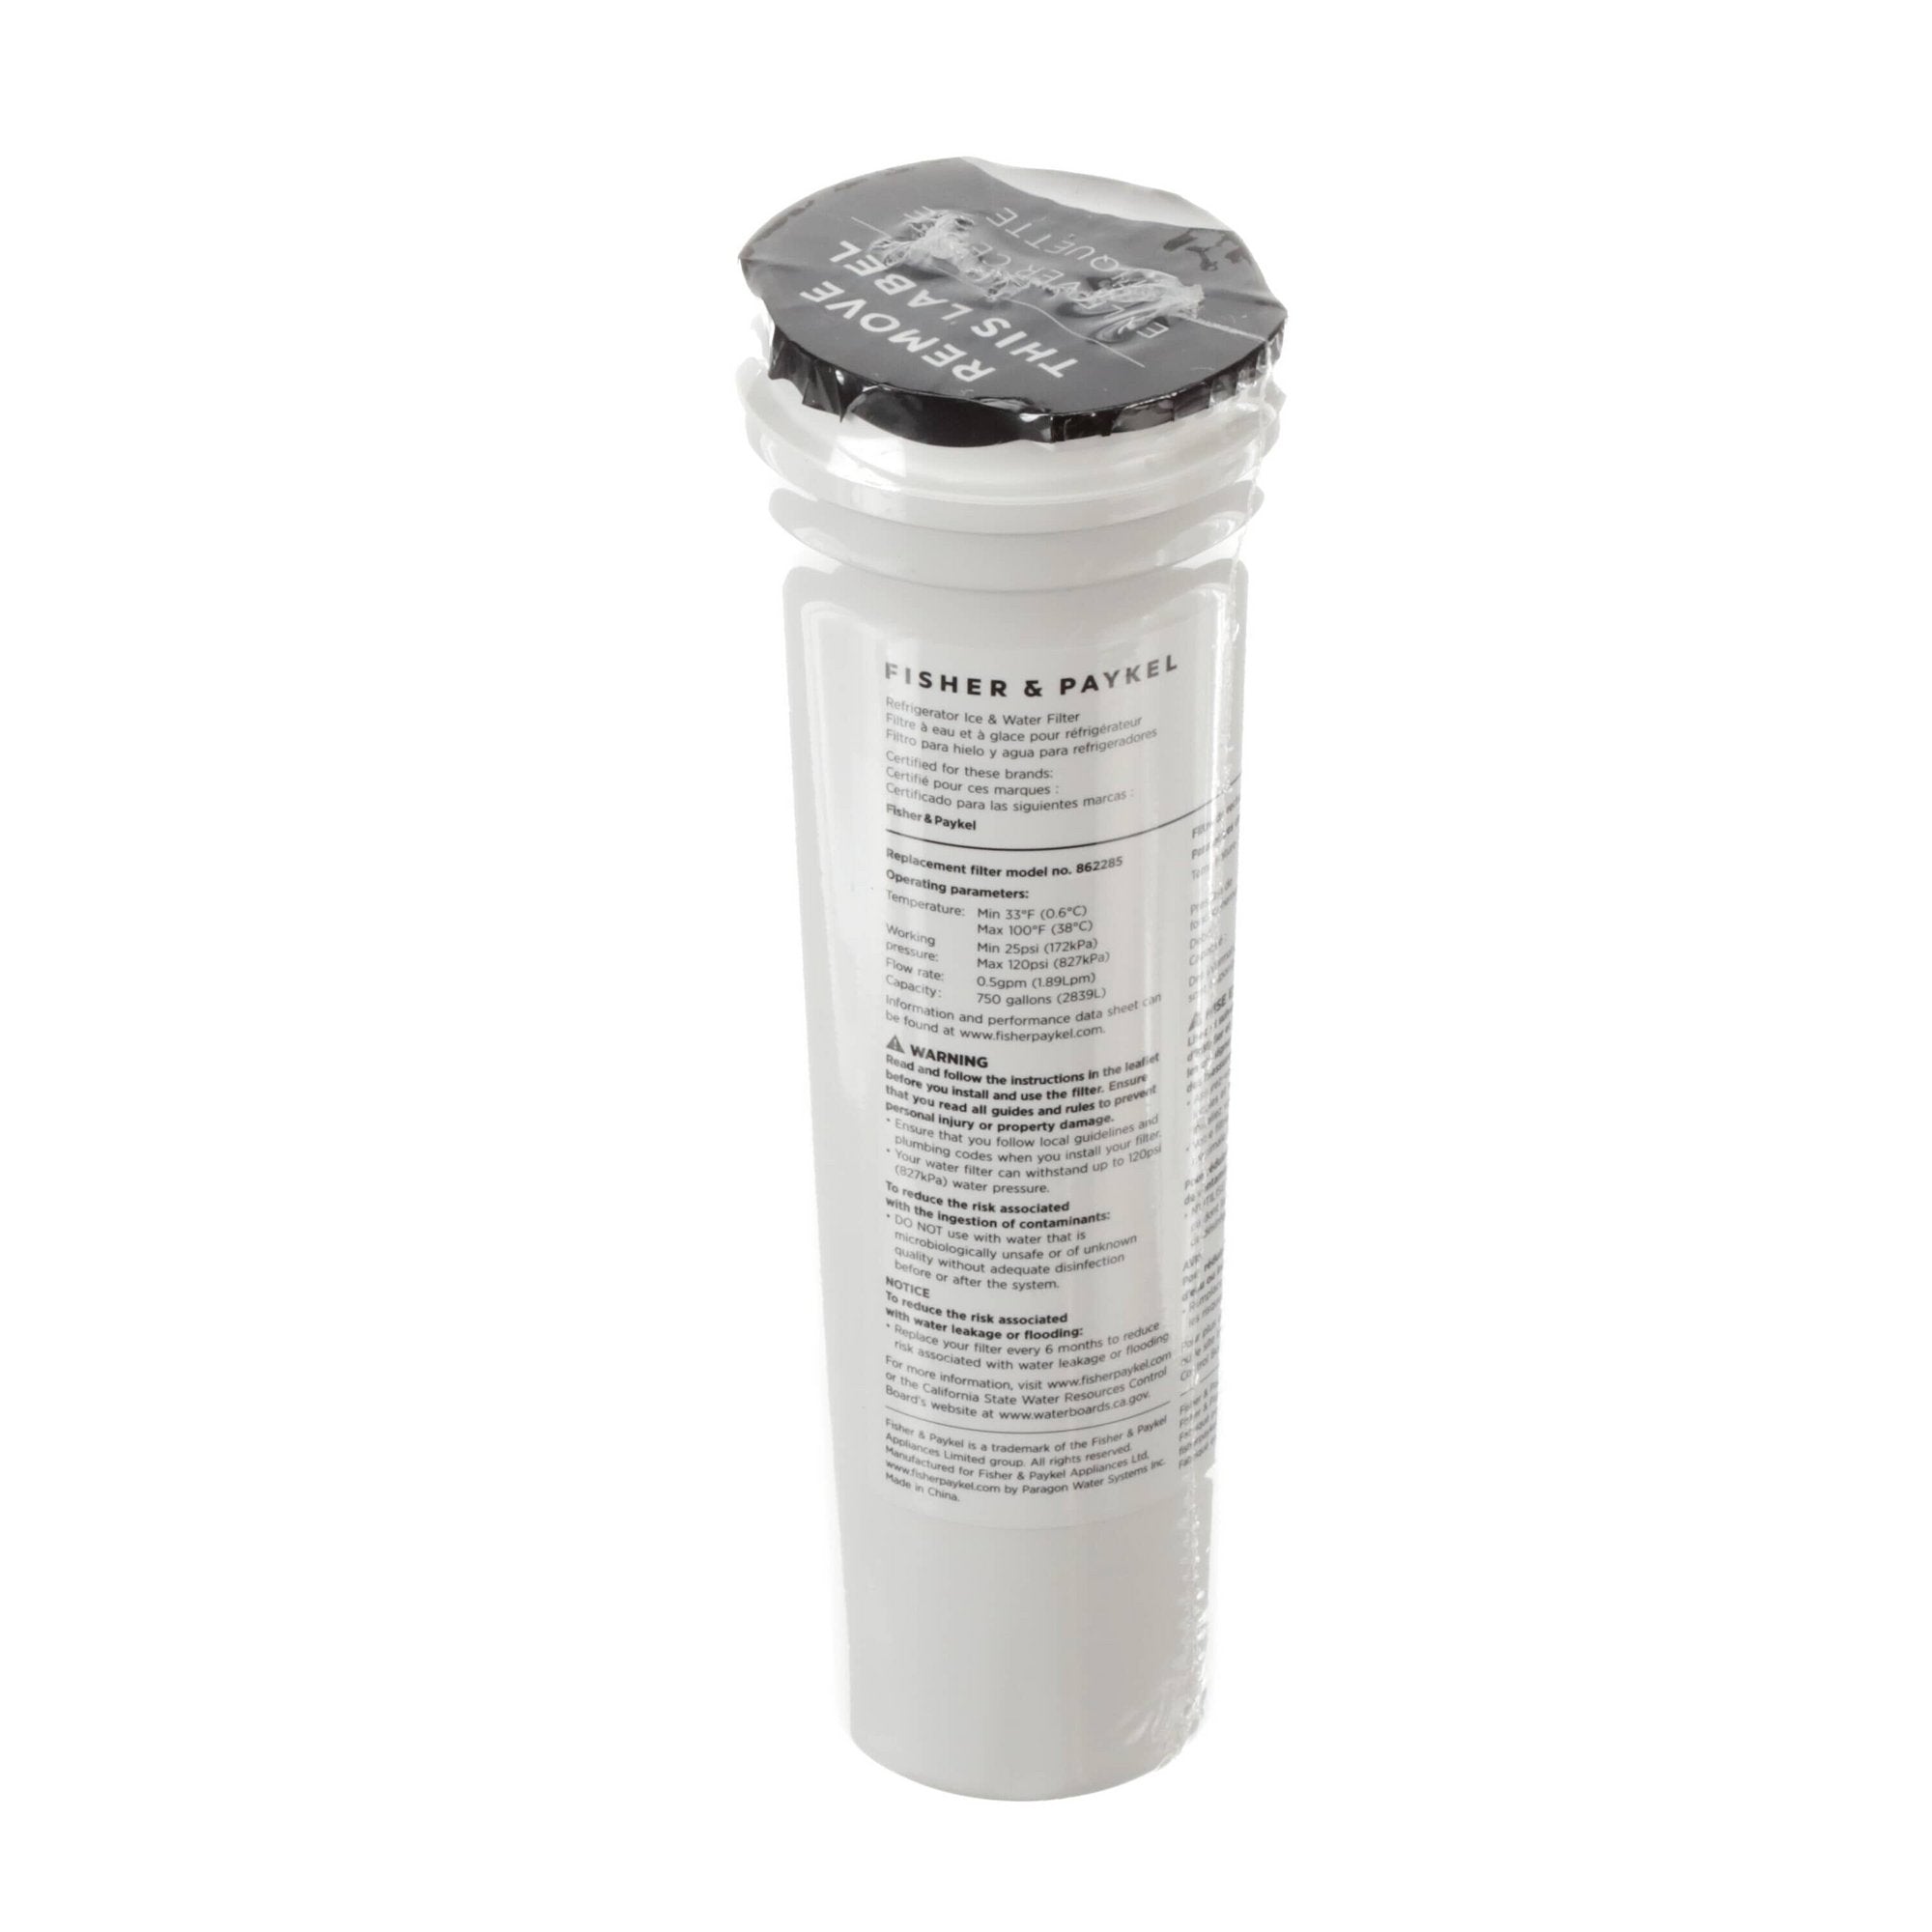 862285 - Fisher & Paykel Refrigerator Water Filter New